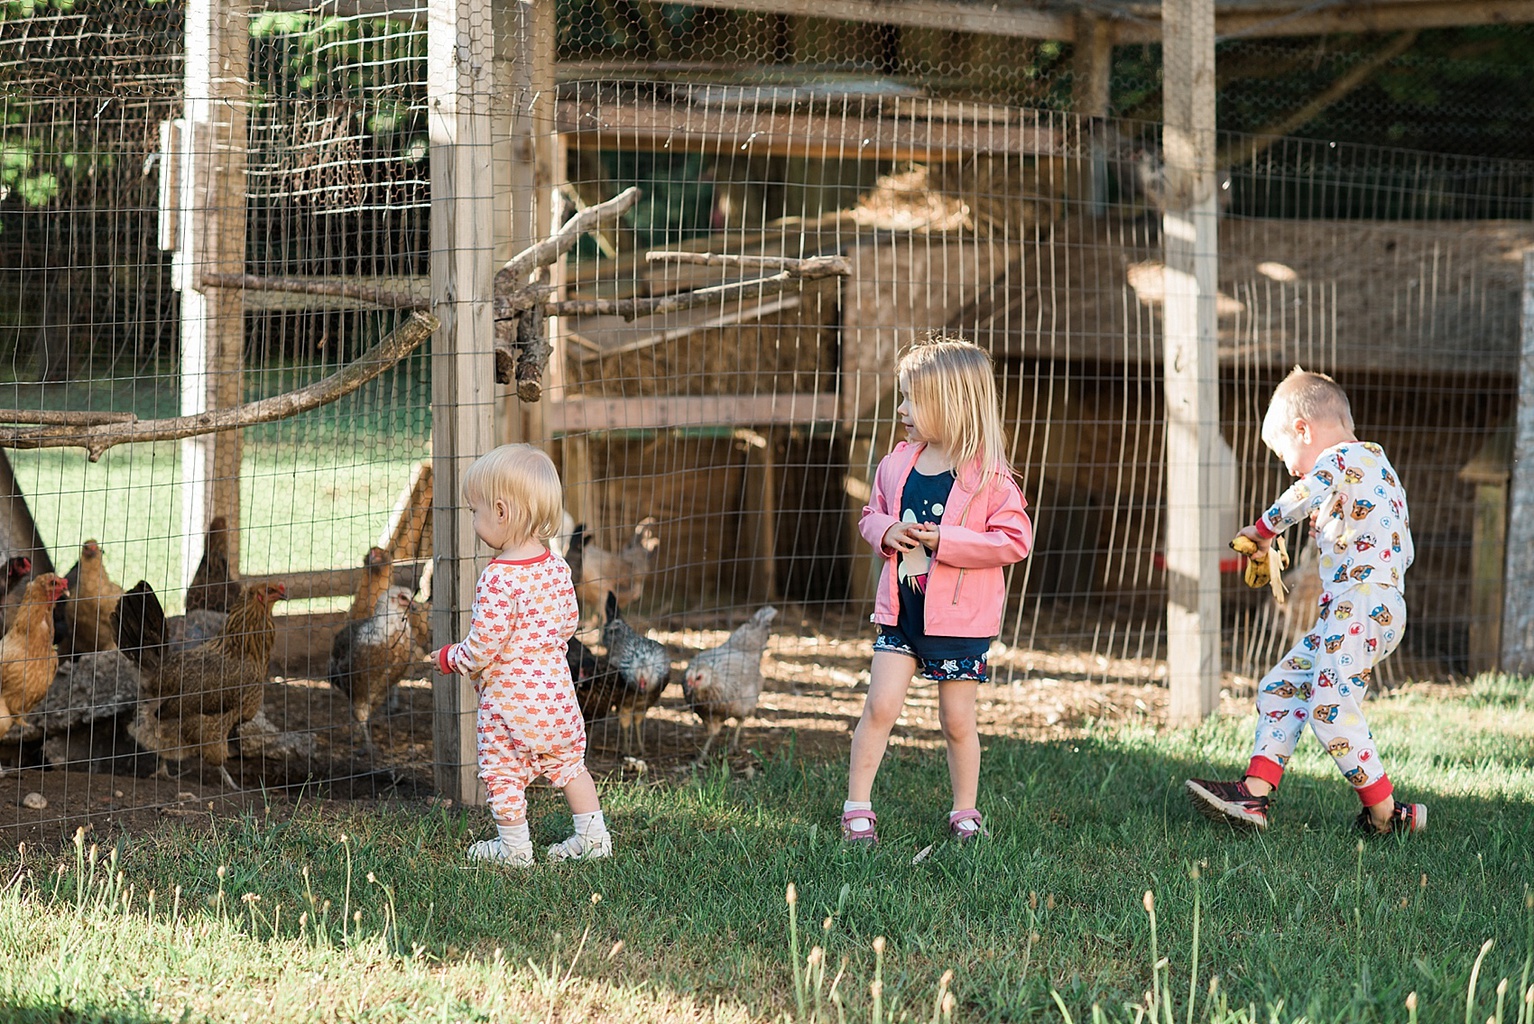 Kids playing near a chicken coop in the Saugatuck, Michigan area